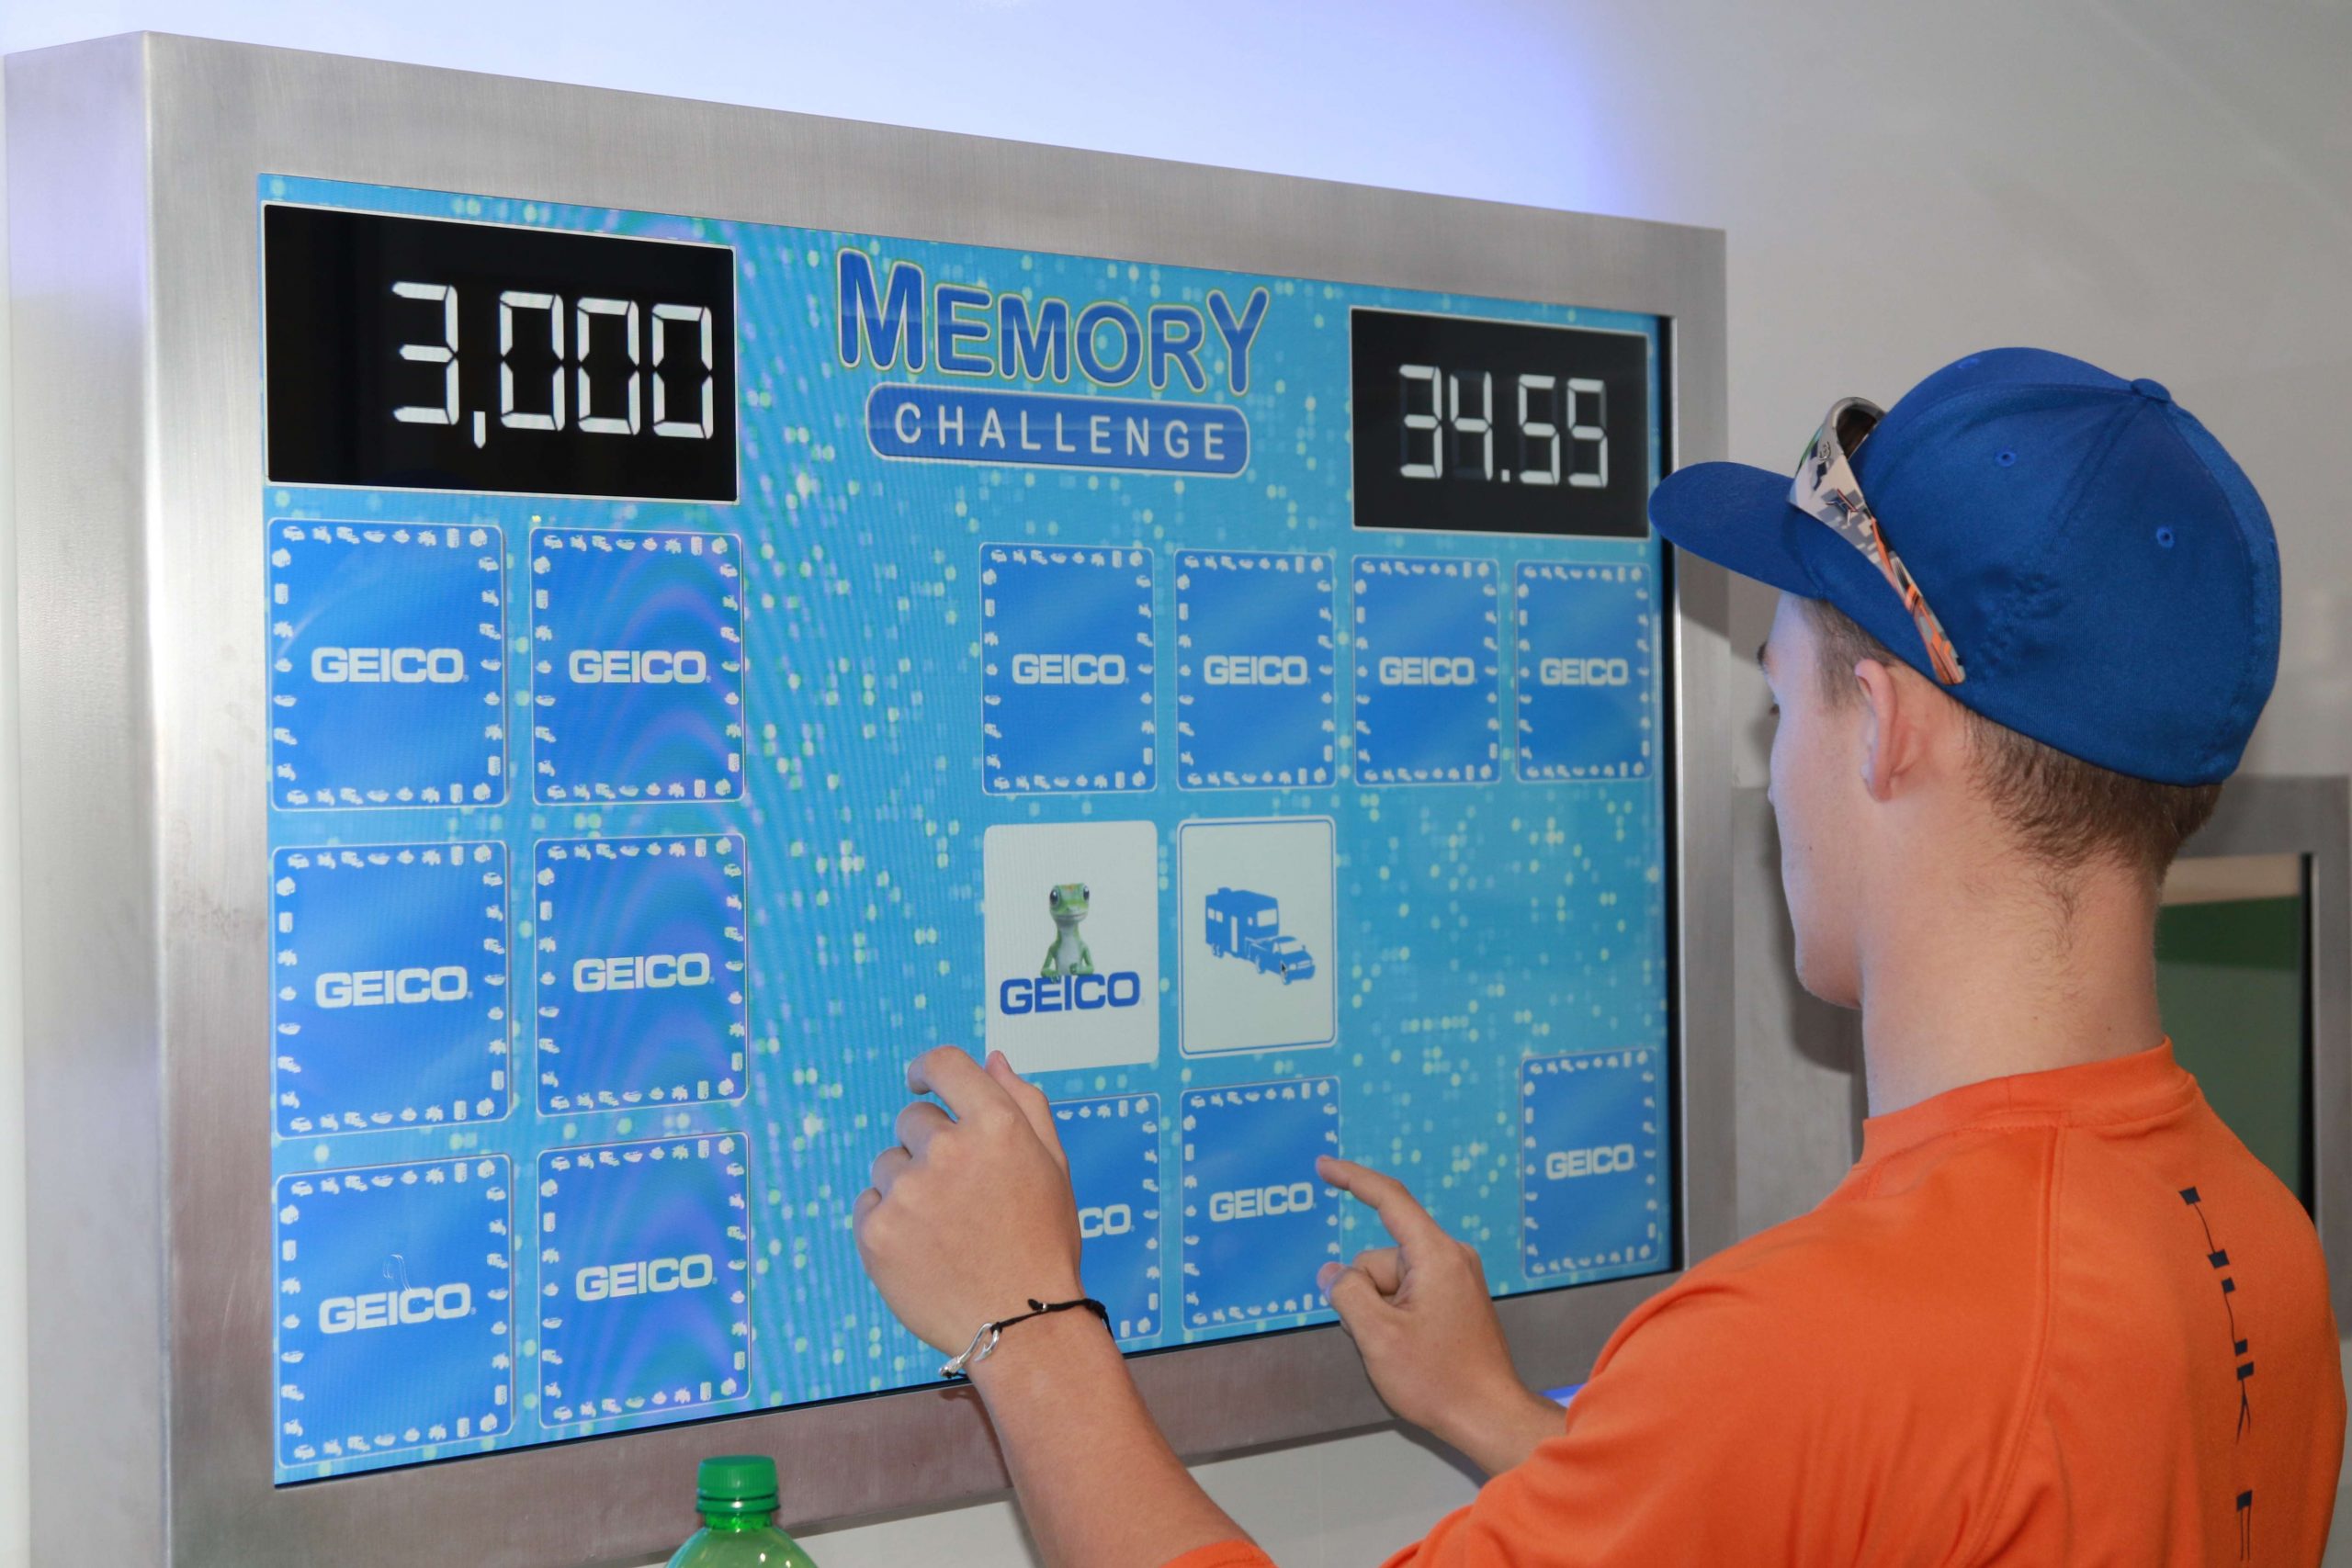 Visitors to the Geico booth tested their recall skills in the Memory Challenge game.
